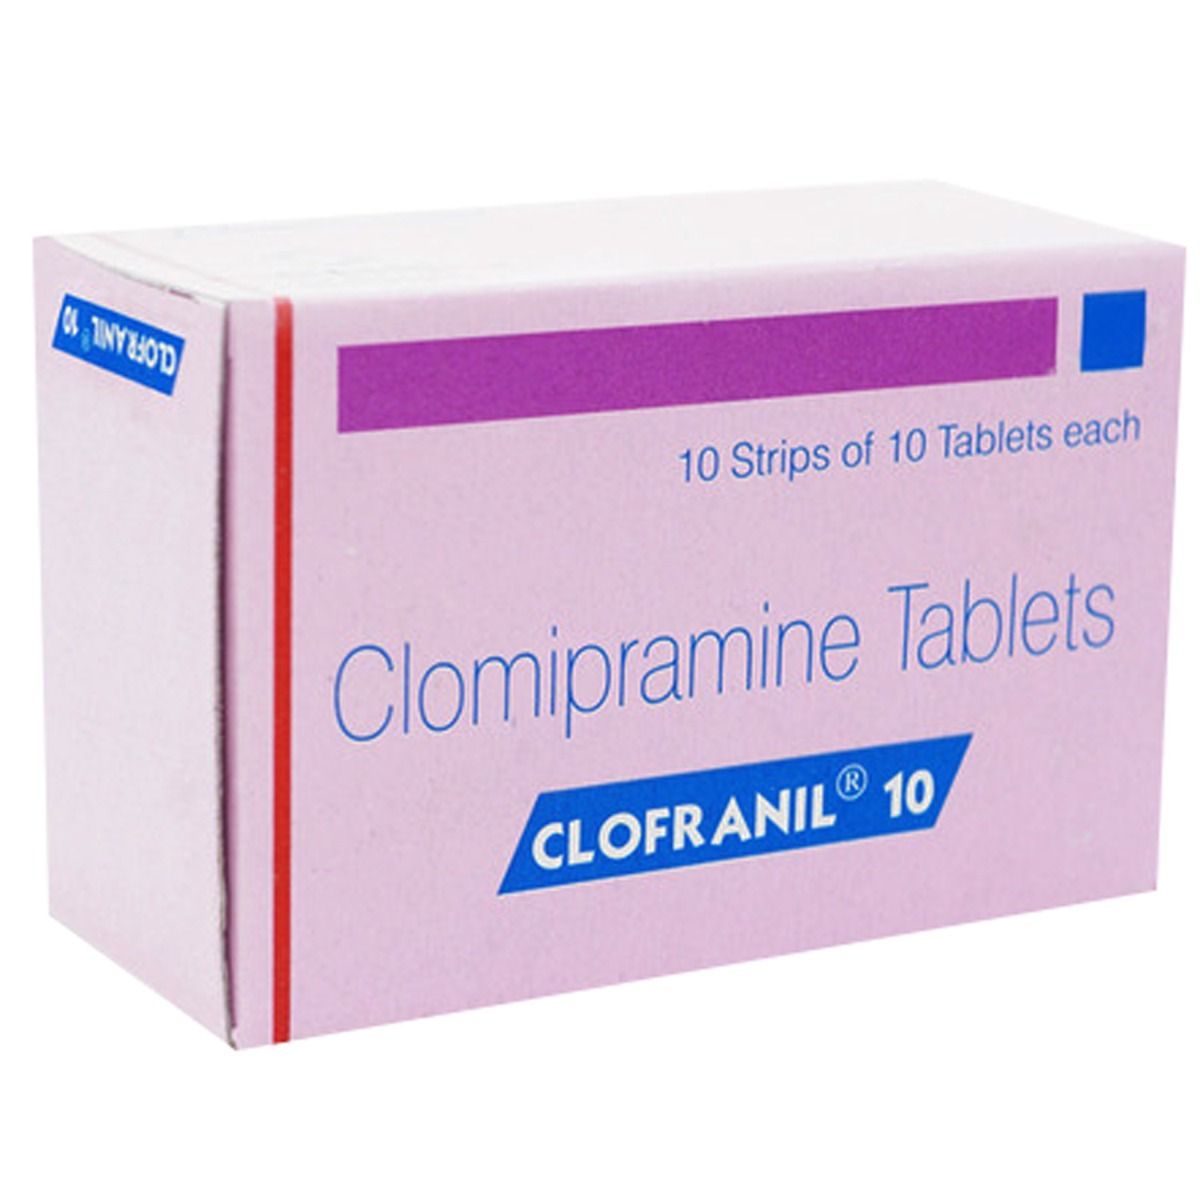 Clofranil 10 Tablet 10's, Pack of 10 TABLETS